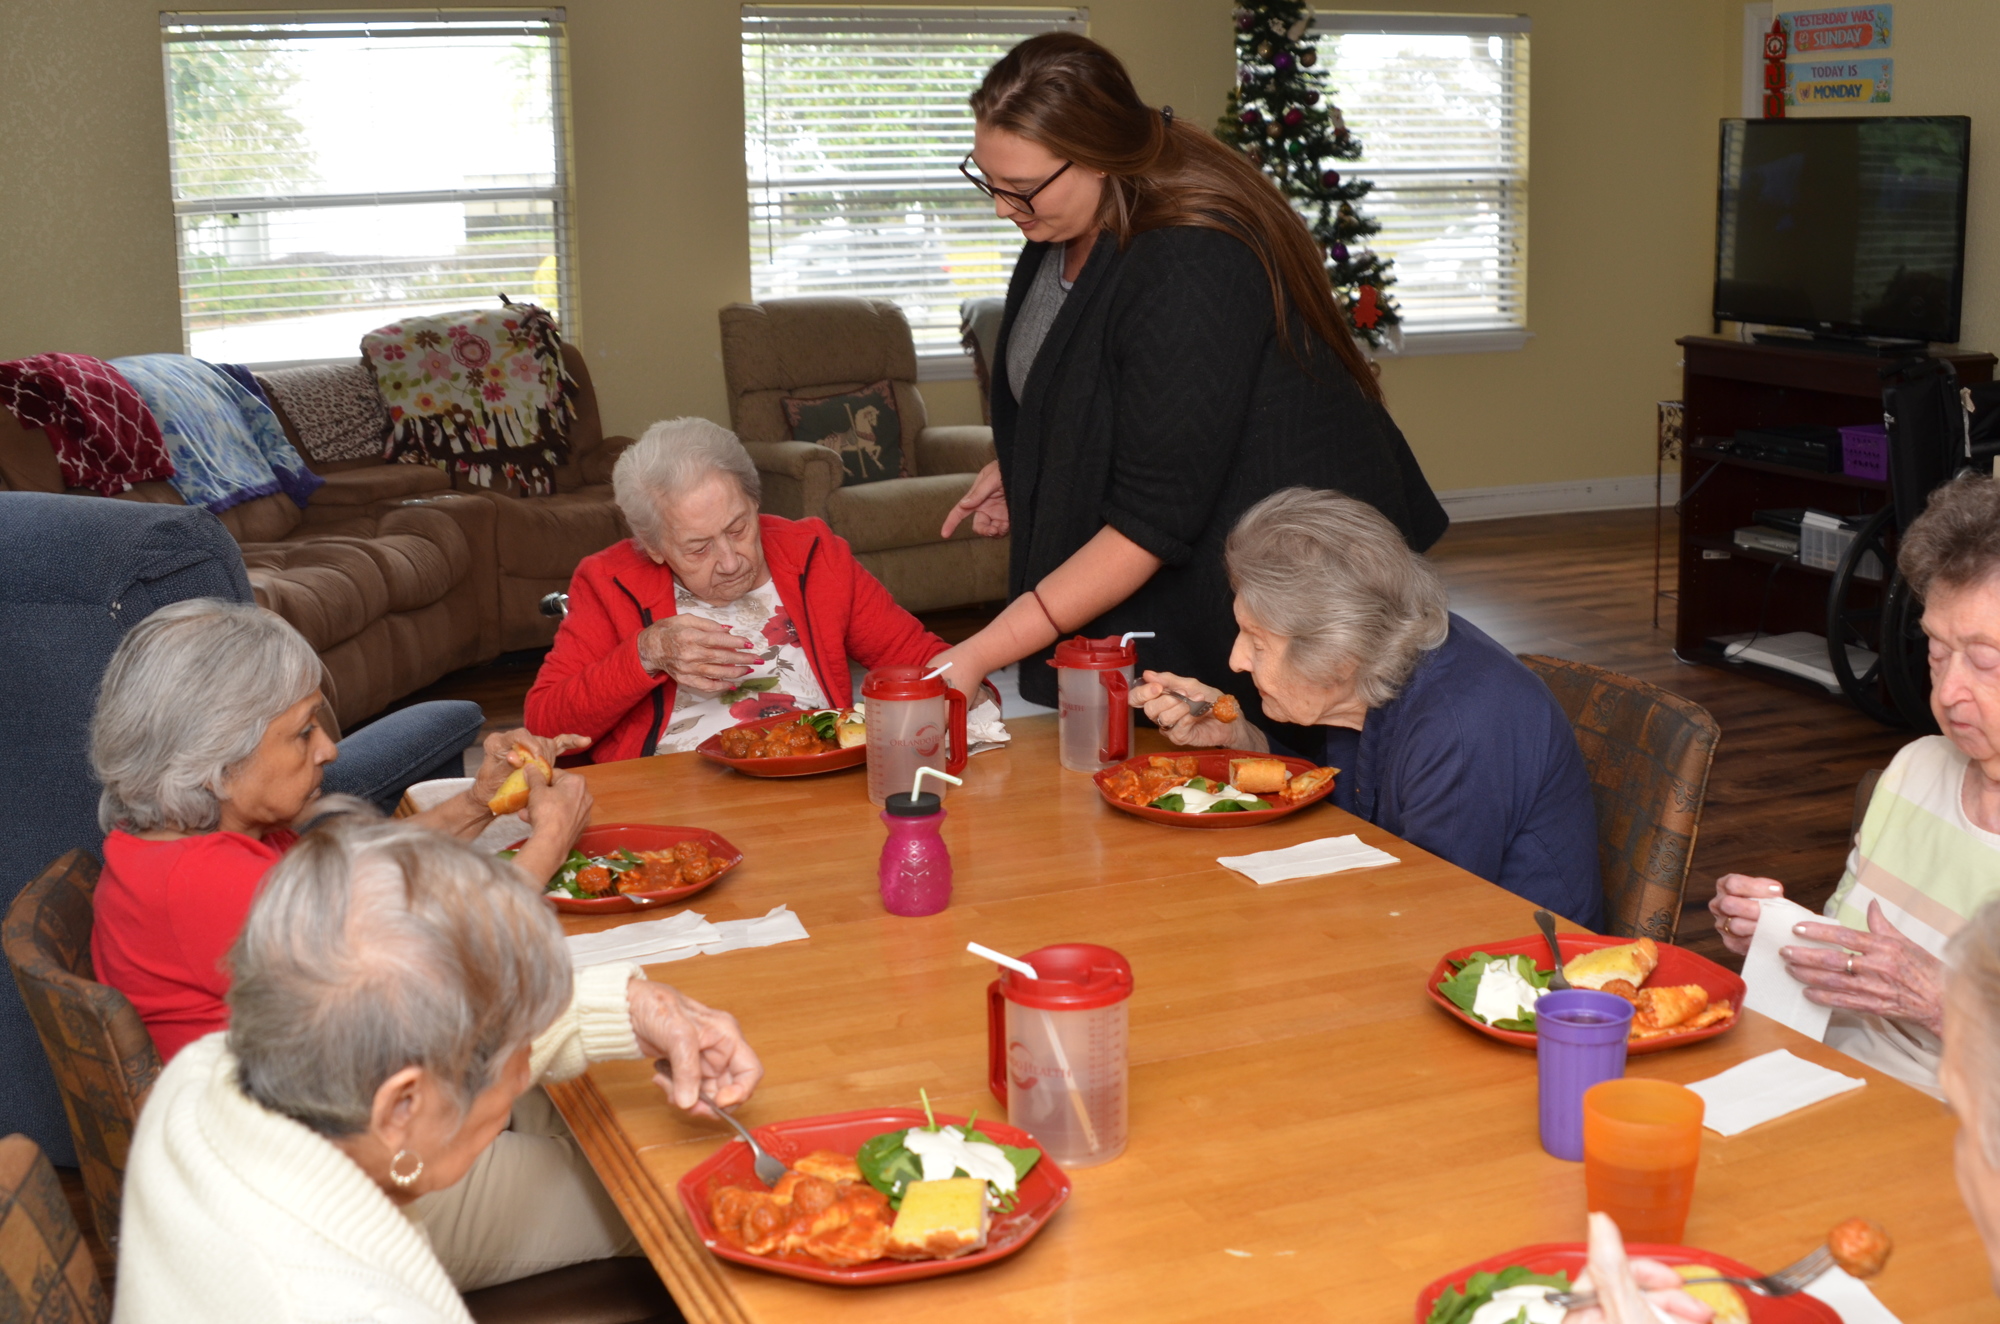 Activities director Amber Holman serves lunch to the residents at The Gardens at Lakeview, in Winter Garden.